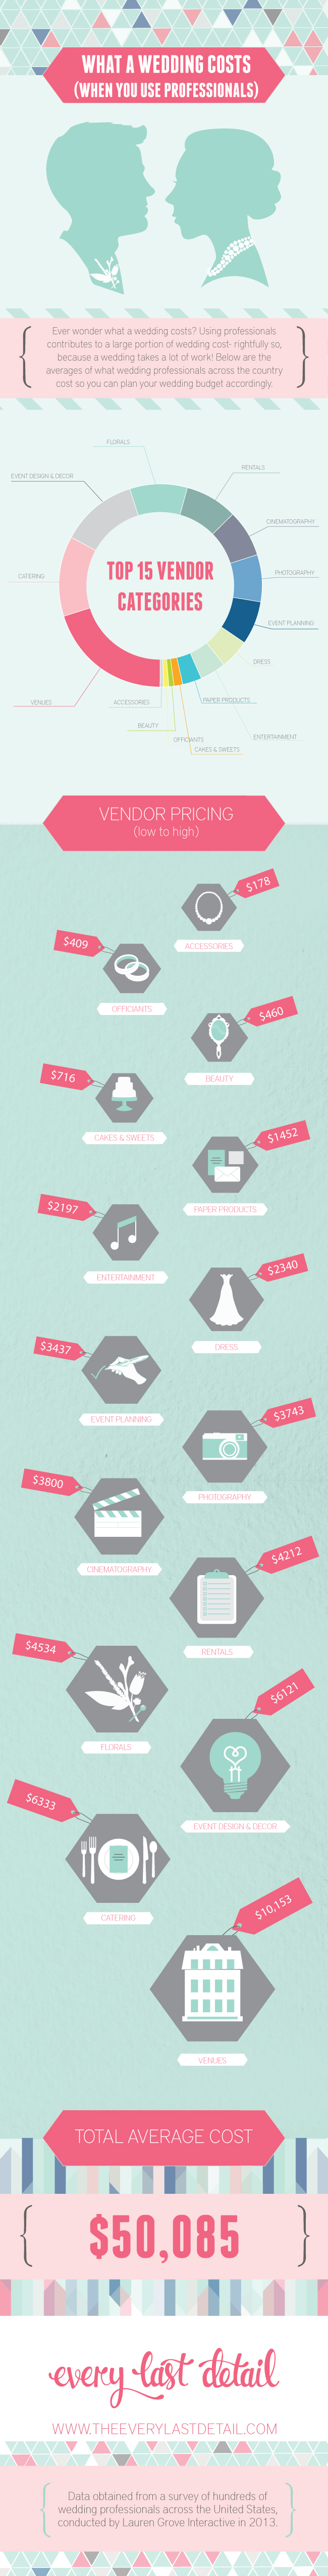 What A Wedding Costs (When You Use Professionals) via TheELD.com